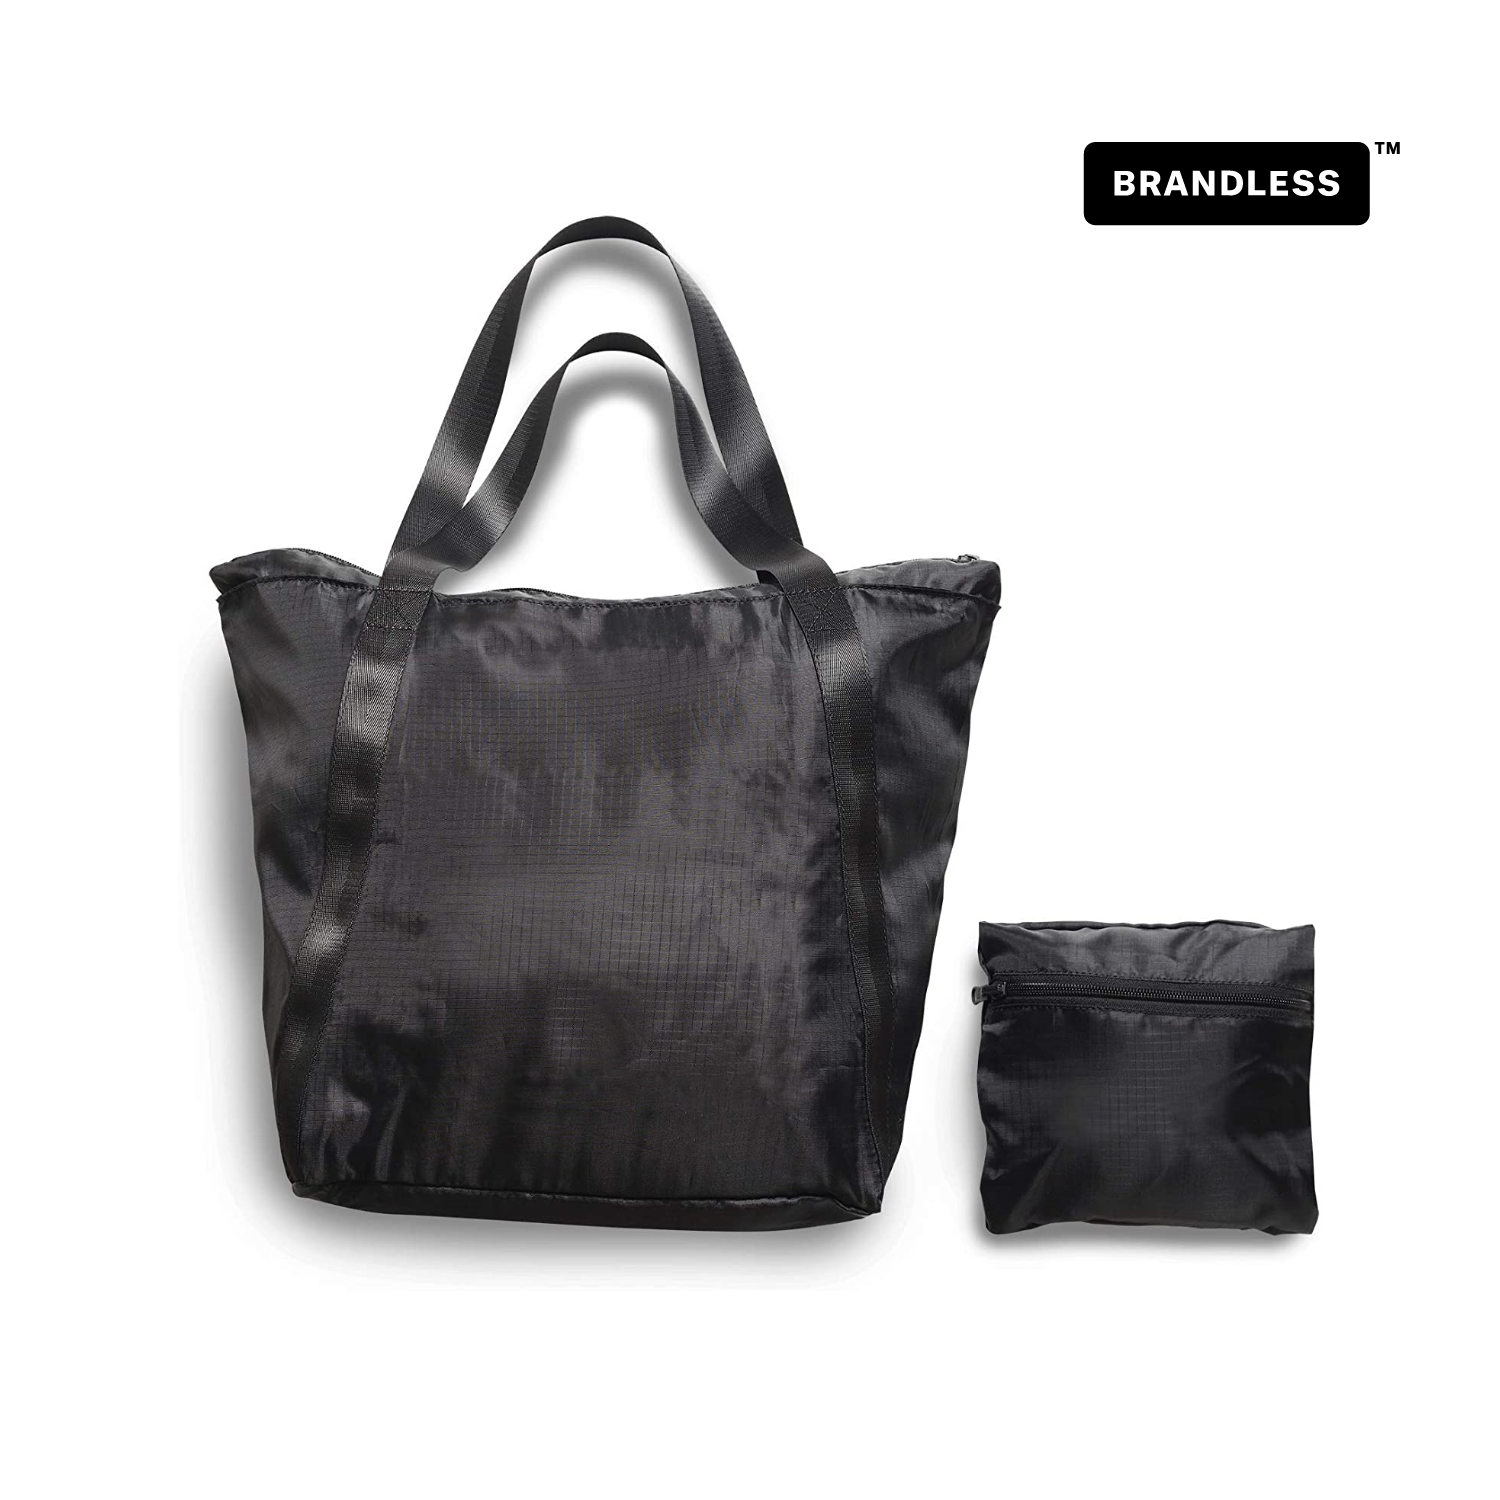 Lightweight Tote Bag with Stow Sack to Bring Everywhere You Go